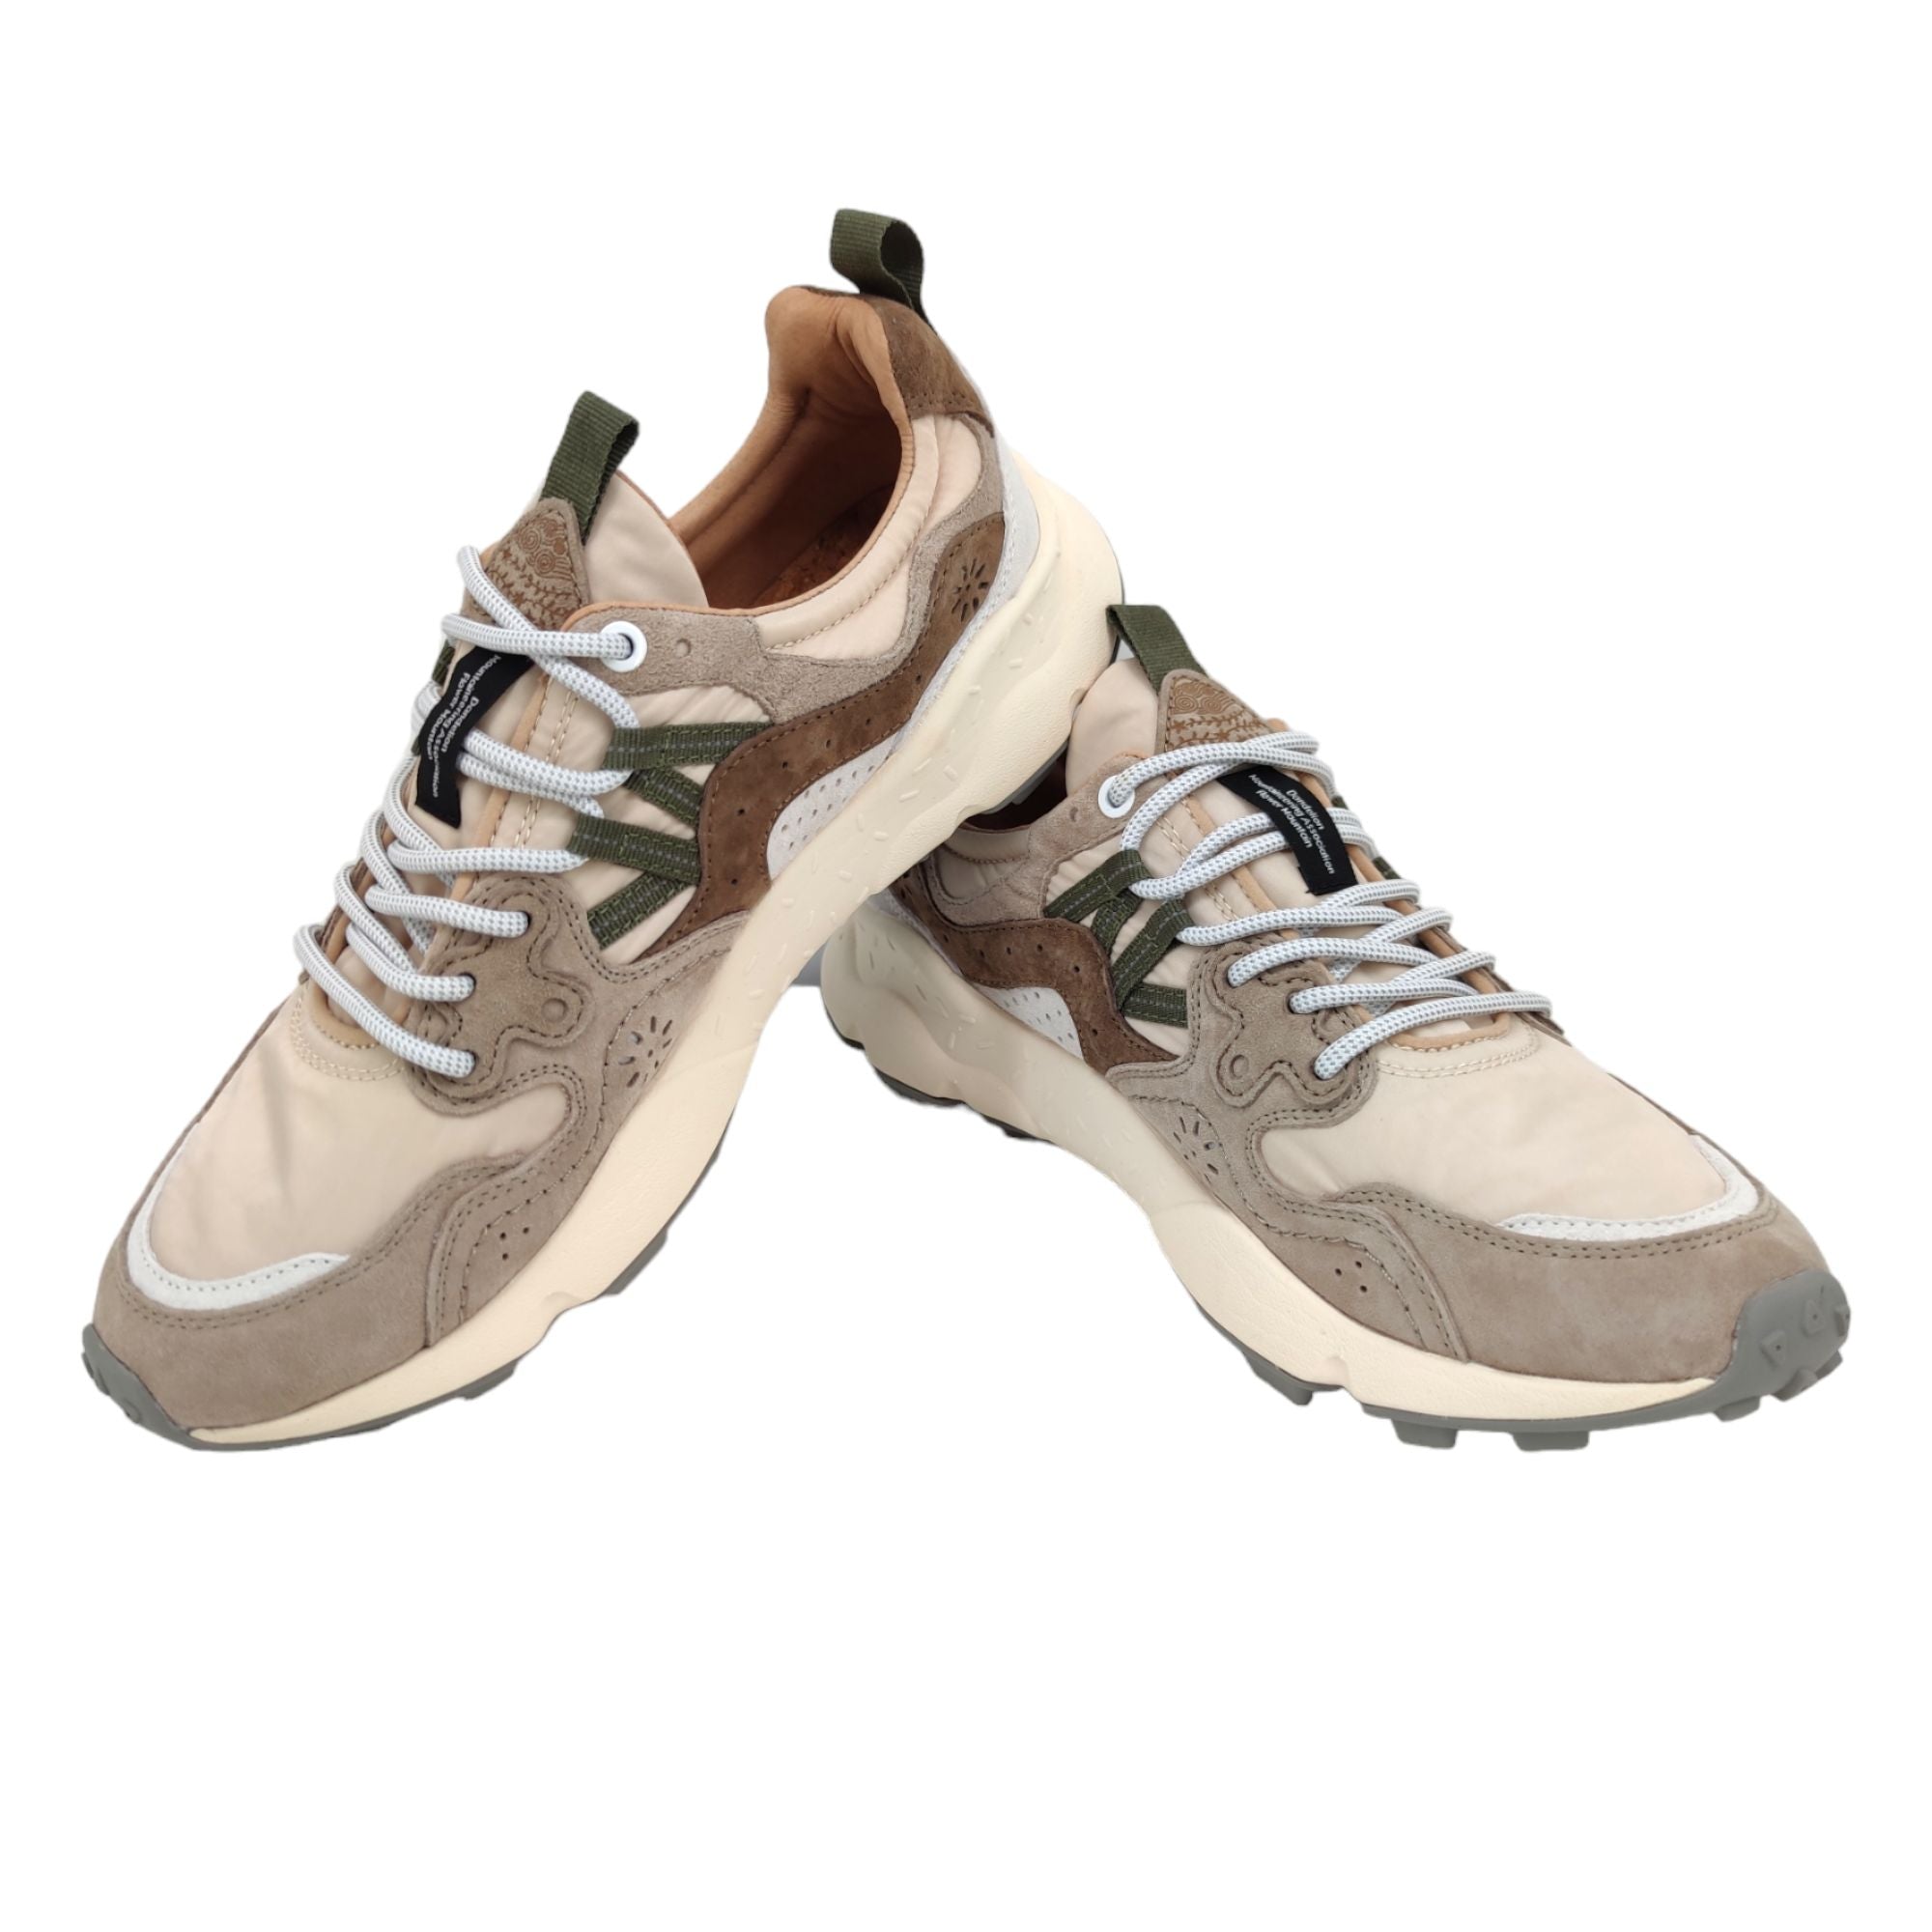 Men's Yamano 3 Shoes Off White/Beige 